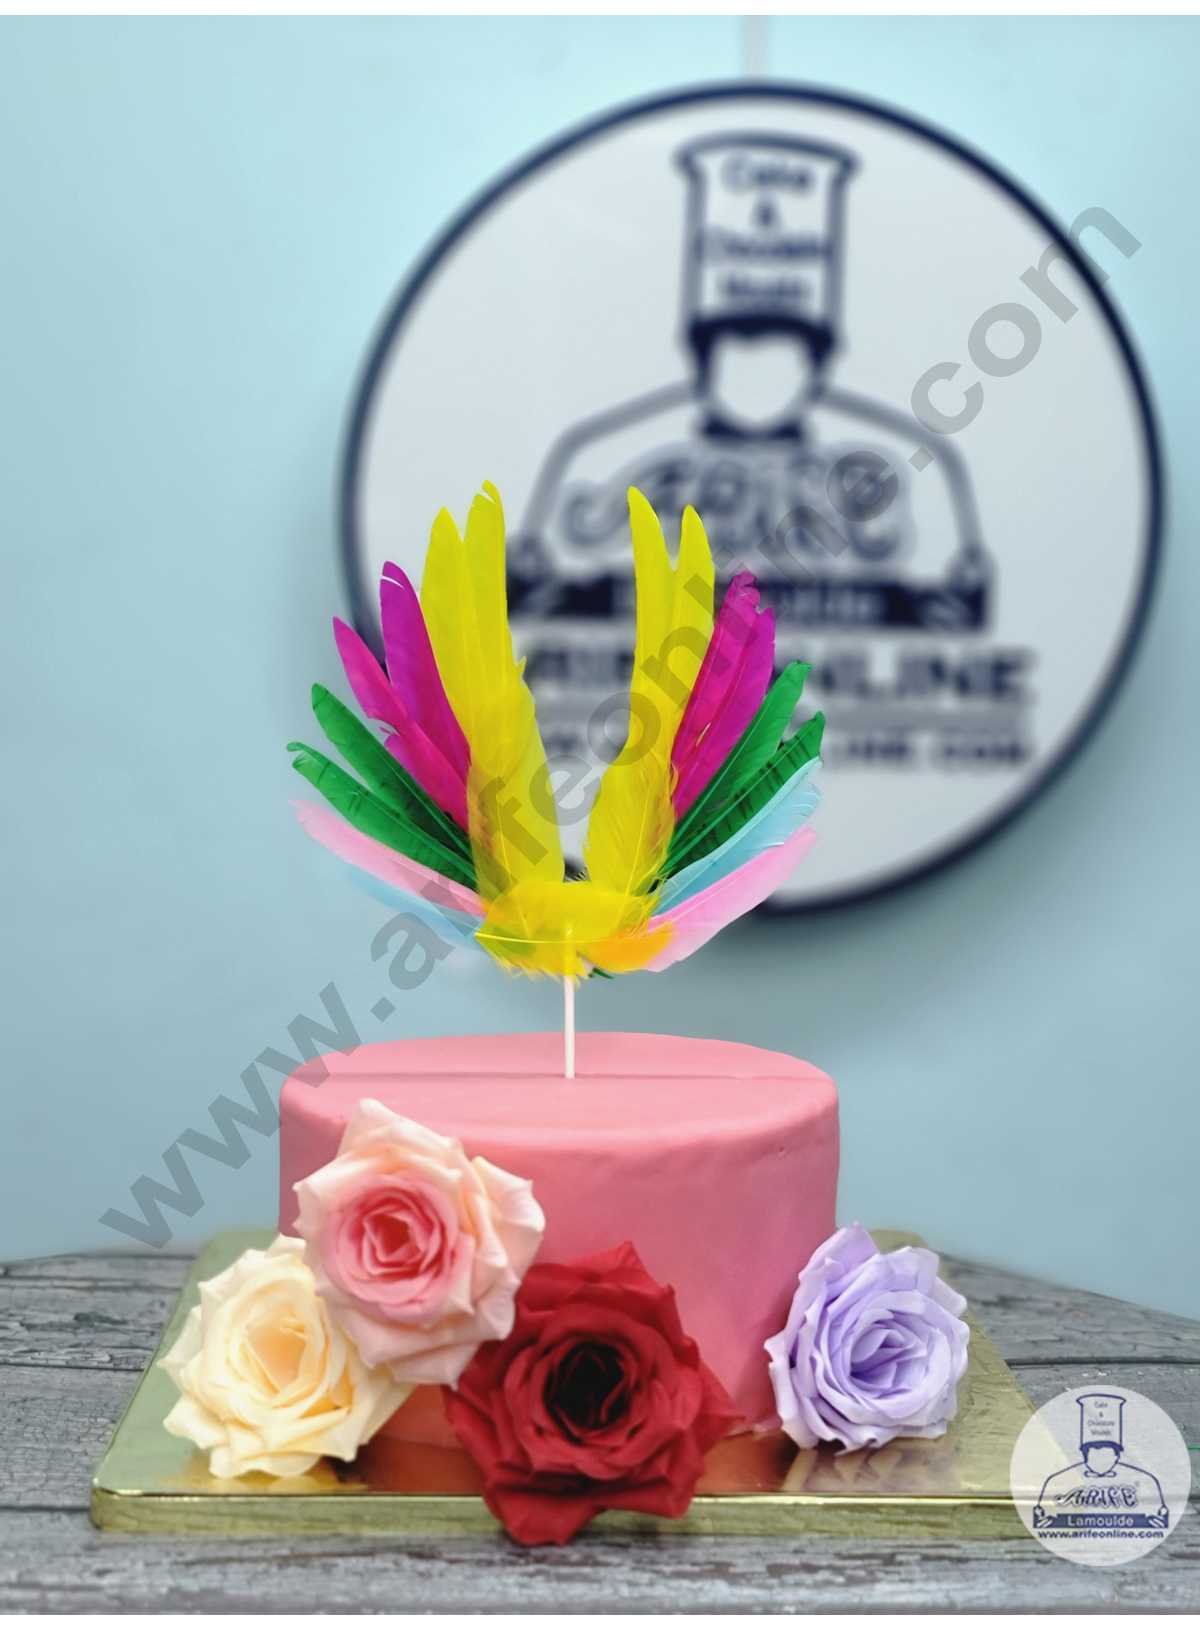 Old-fashioned Feather Cake – A Hundred Years Ago